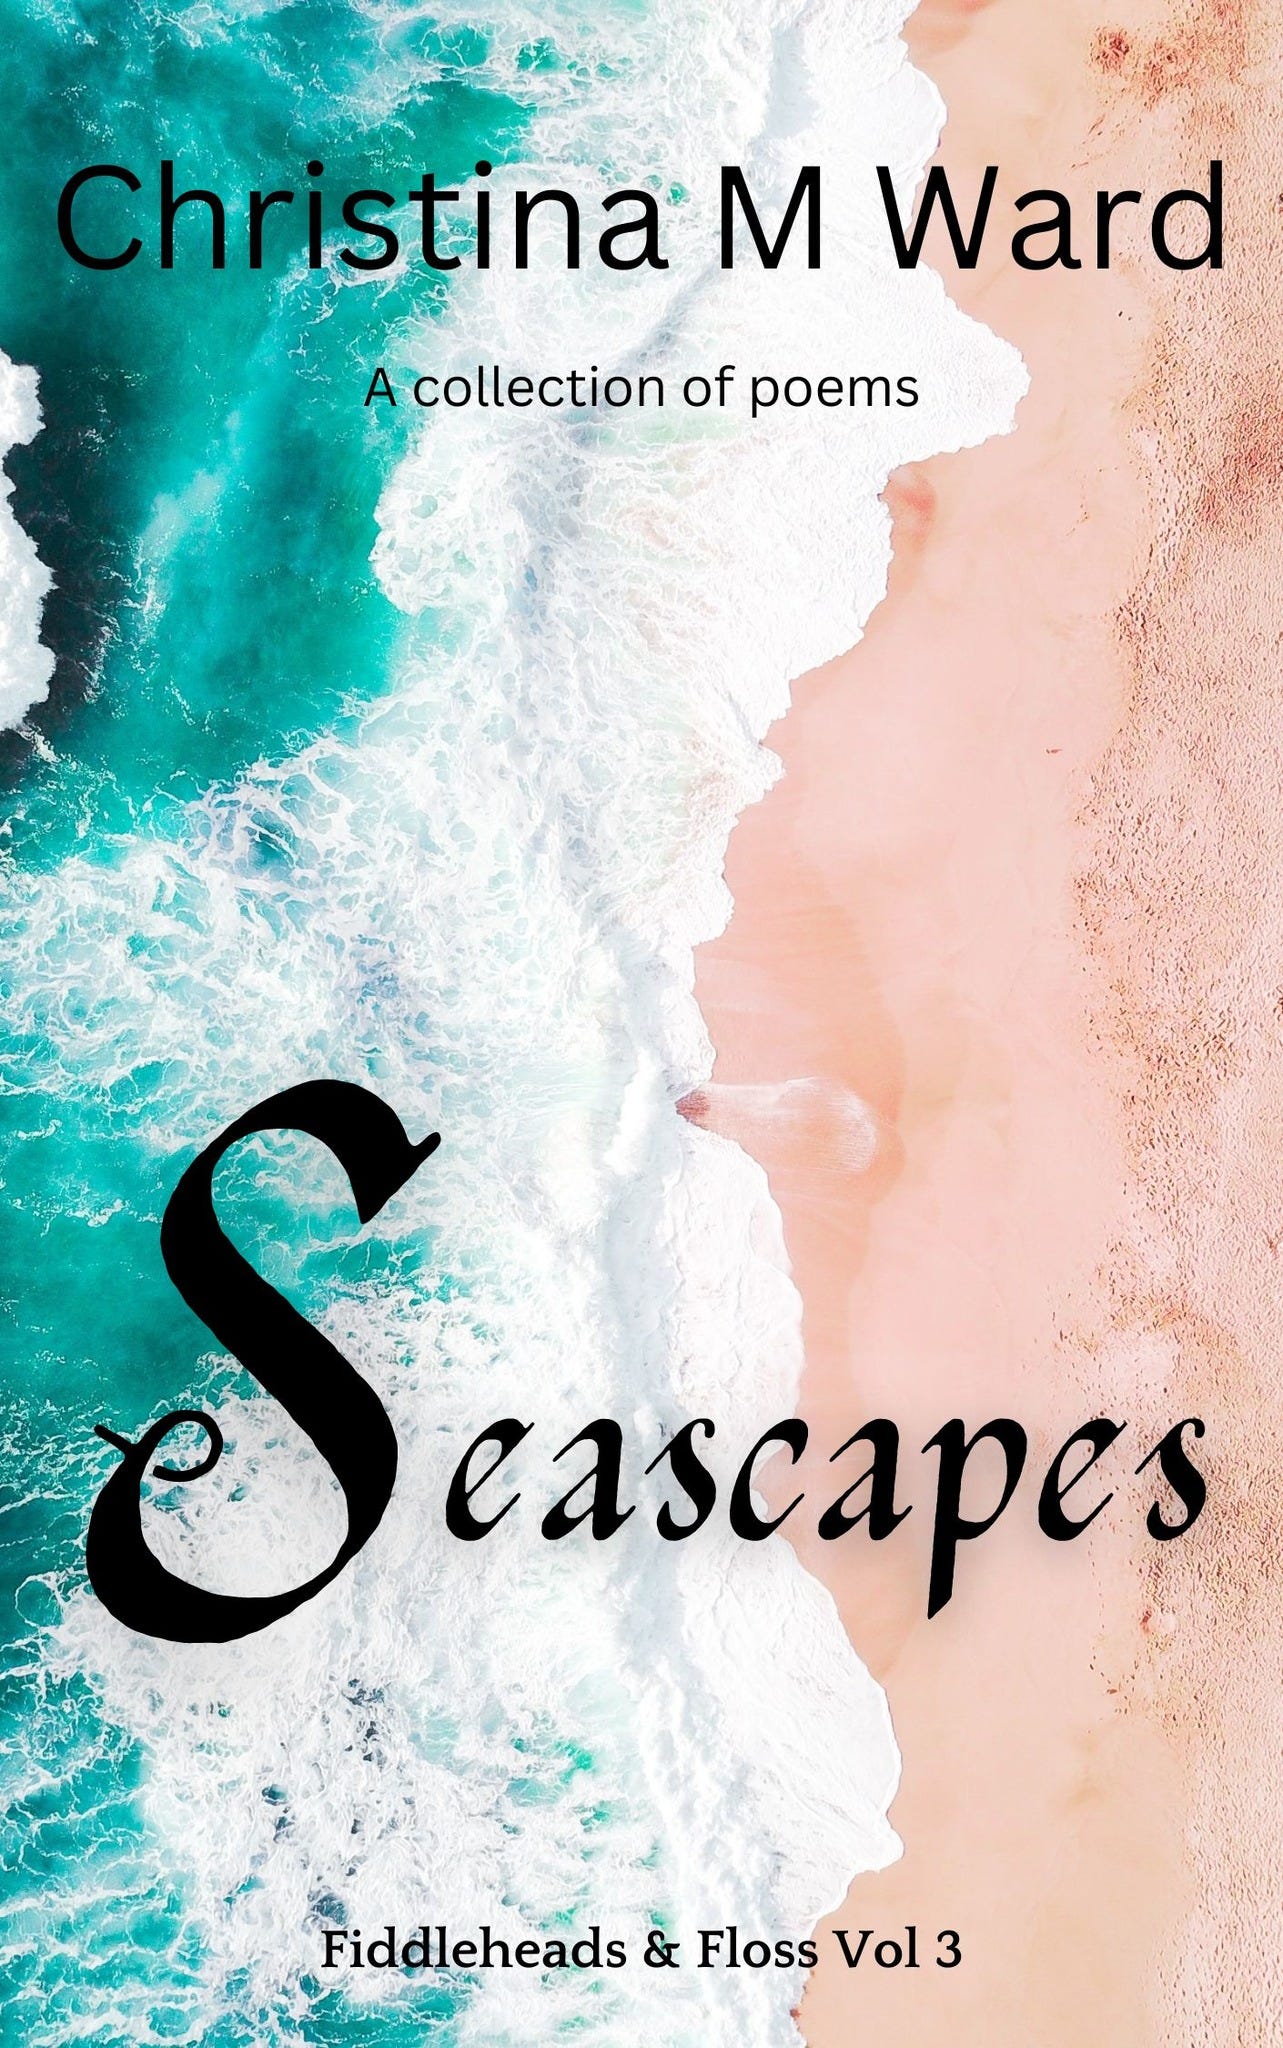 May be an image of text that says 'Christina M Ward A collection of poems Scascapes S eascapes Fiddleheads & Floss Vol 3'